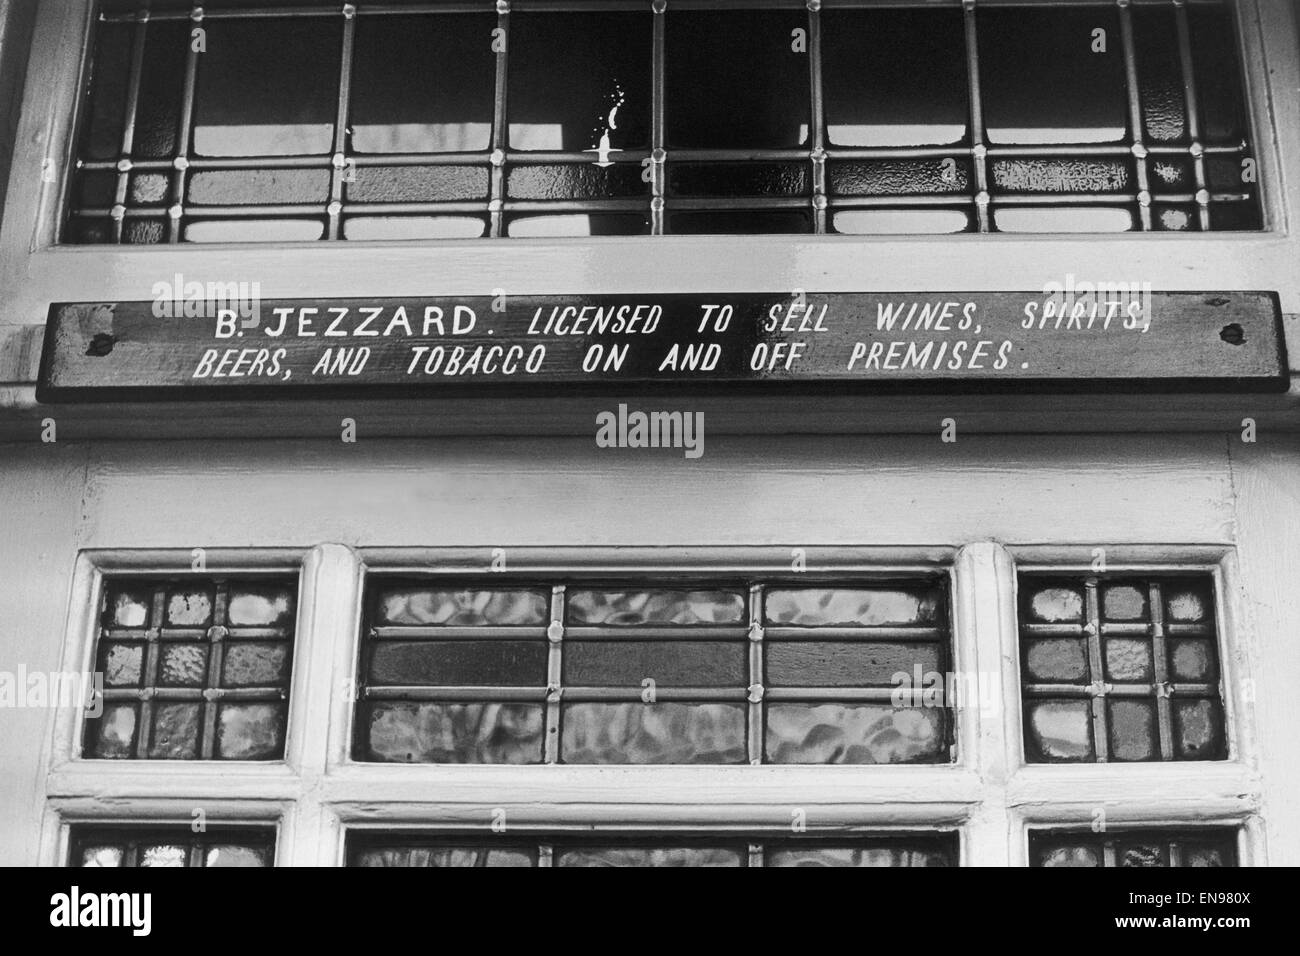 Picture showing licence above the door at The Thatched House pub, Dalling Road, W6, London, naming Bedford Jezzard, the ex - Fulham footballer who ran it after his football career was over. 7th December 1964. Stock Photo